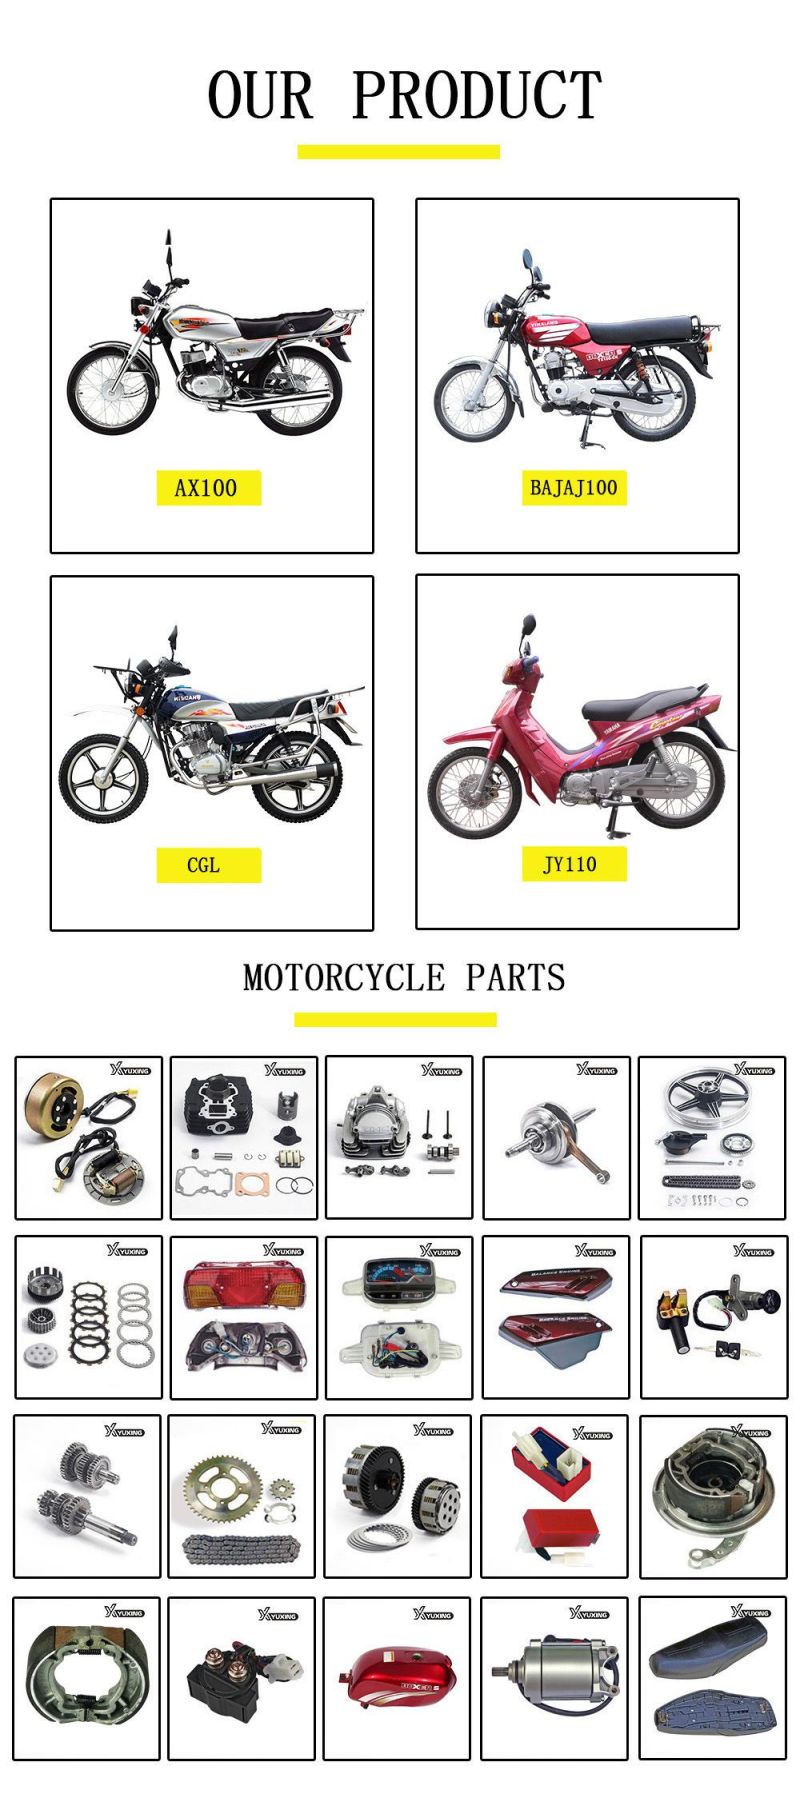 Jy110 Transmission Gear Set High Quality Motorcycle Spare Parts